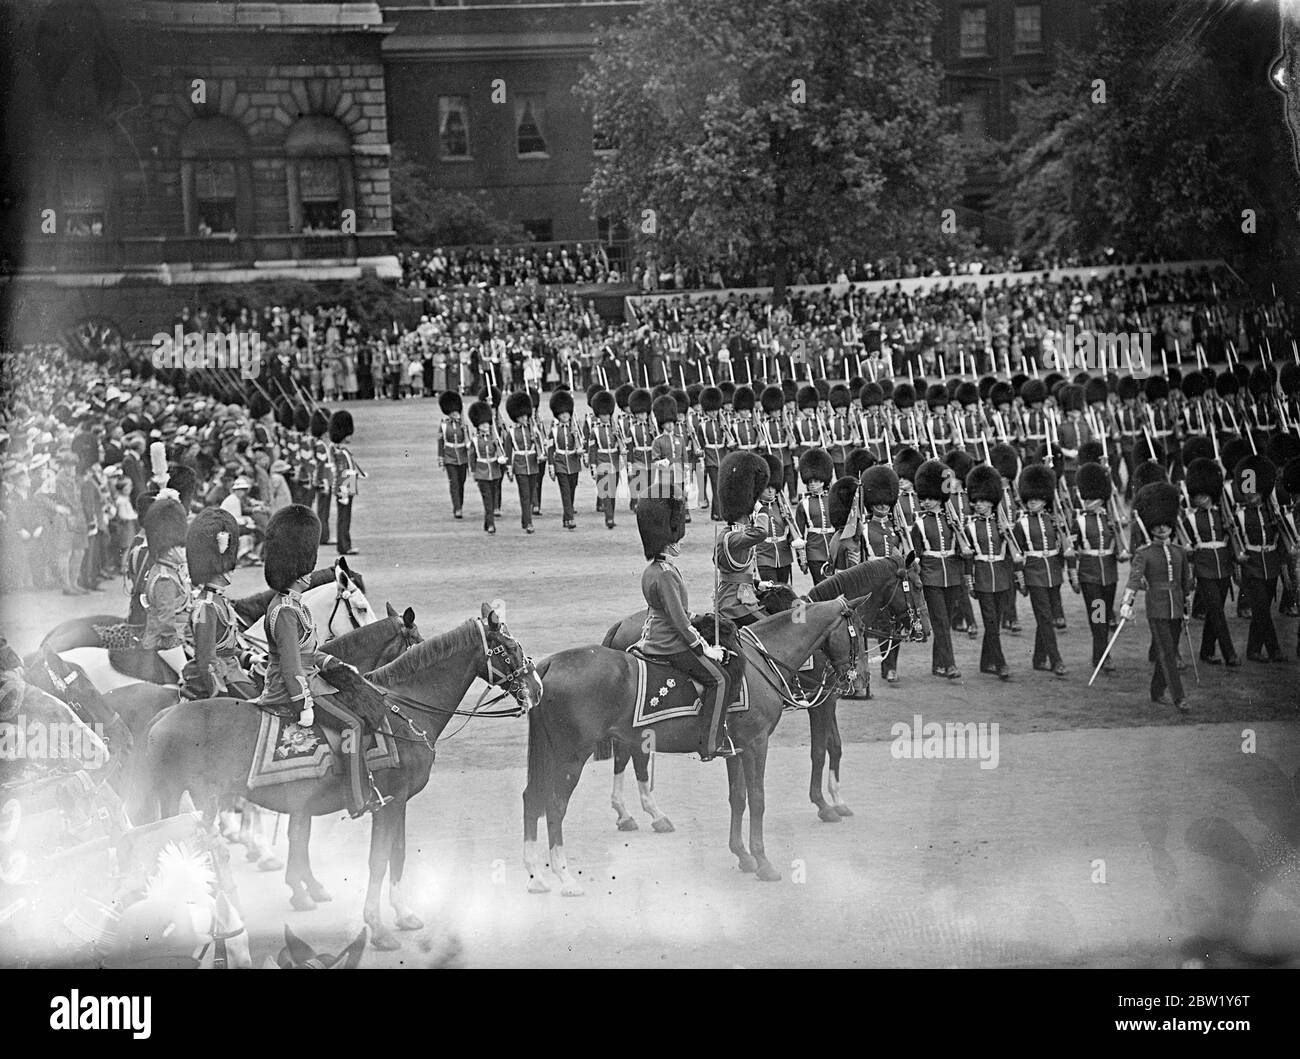 King at Trooping the Colour ceremony. For the first time since his succession the King rode in procession from Buckingham Palace to attend the ceremony of Trooping the Colour on the Horse Guards Parade. The King was accompanied by the Duke of Gloucester and Kent and Prince Arthur of Connaught. The Queen and other members of the Royal Family watched the ceremony. The colour of the first Battalion Coldstream Guards was trooped. Photo shows: the march past the King. 9 June 1937 Stock Photo